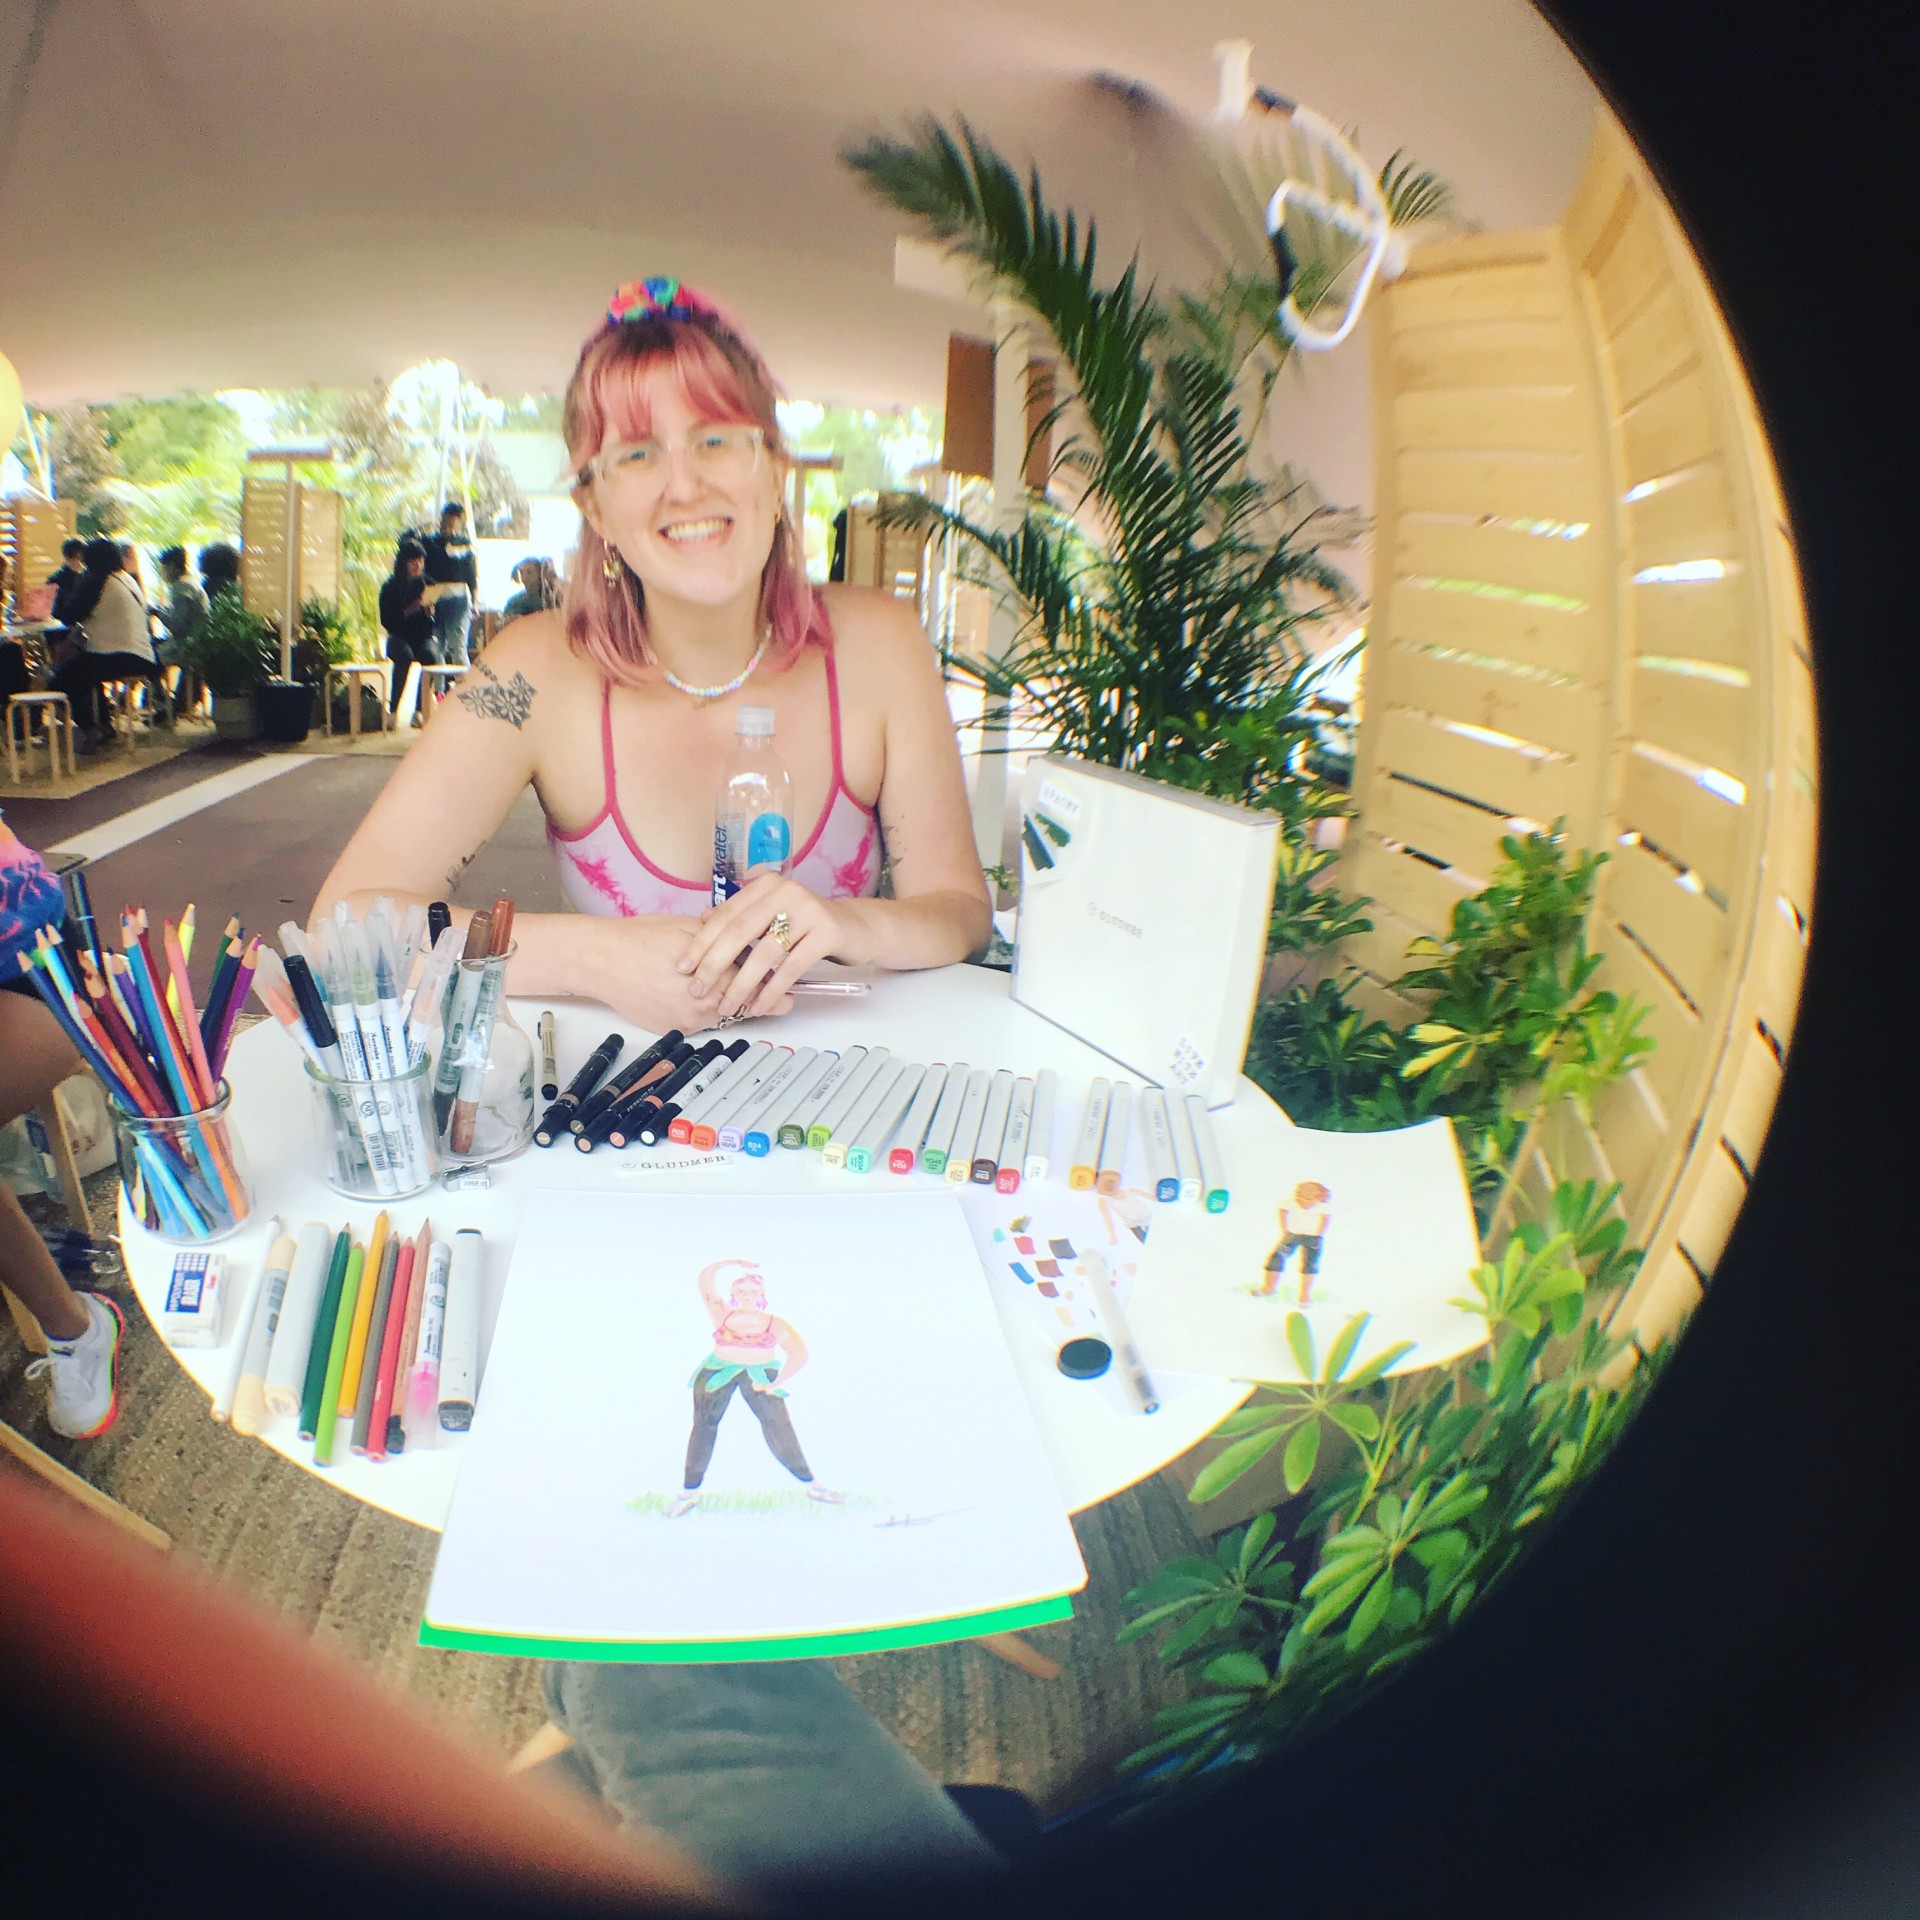 Fisheye angle photograph of portrait drawing station with markers, paper and model